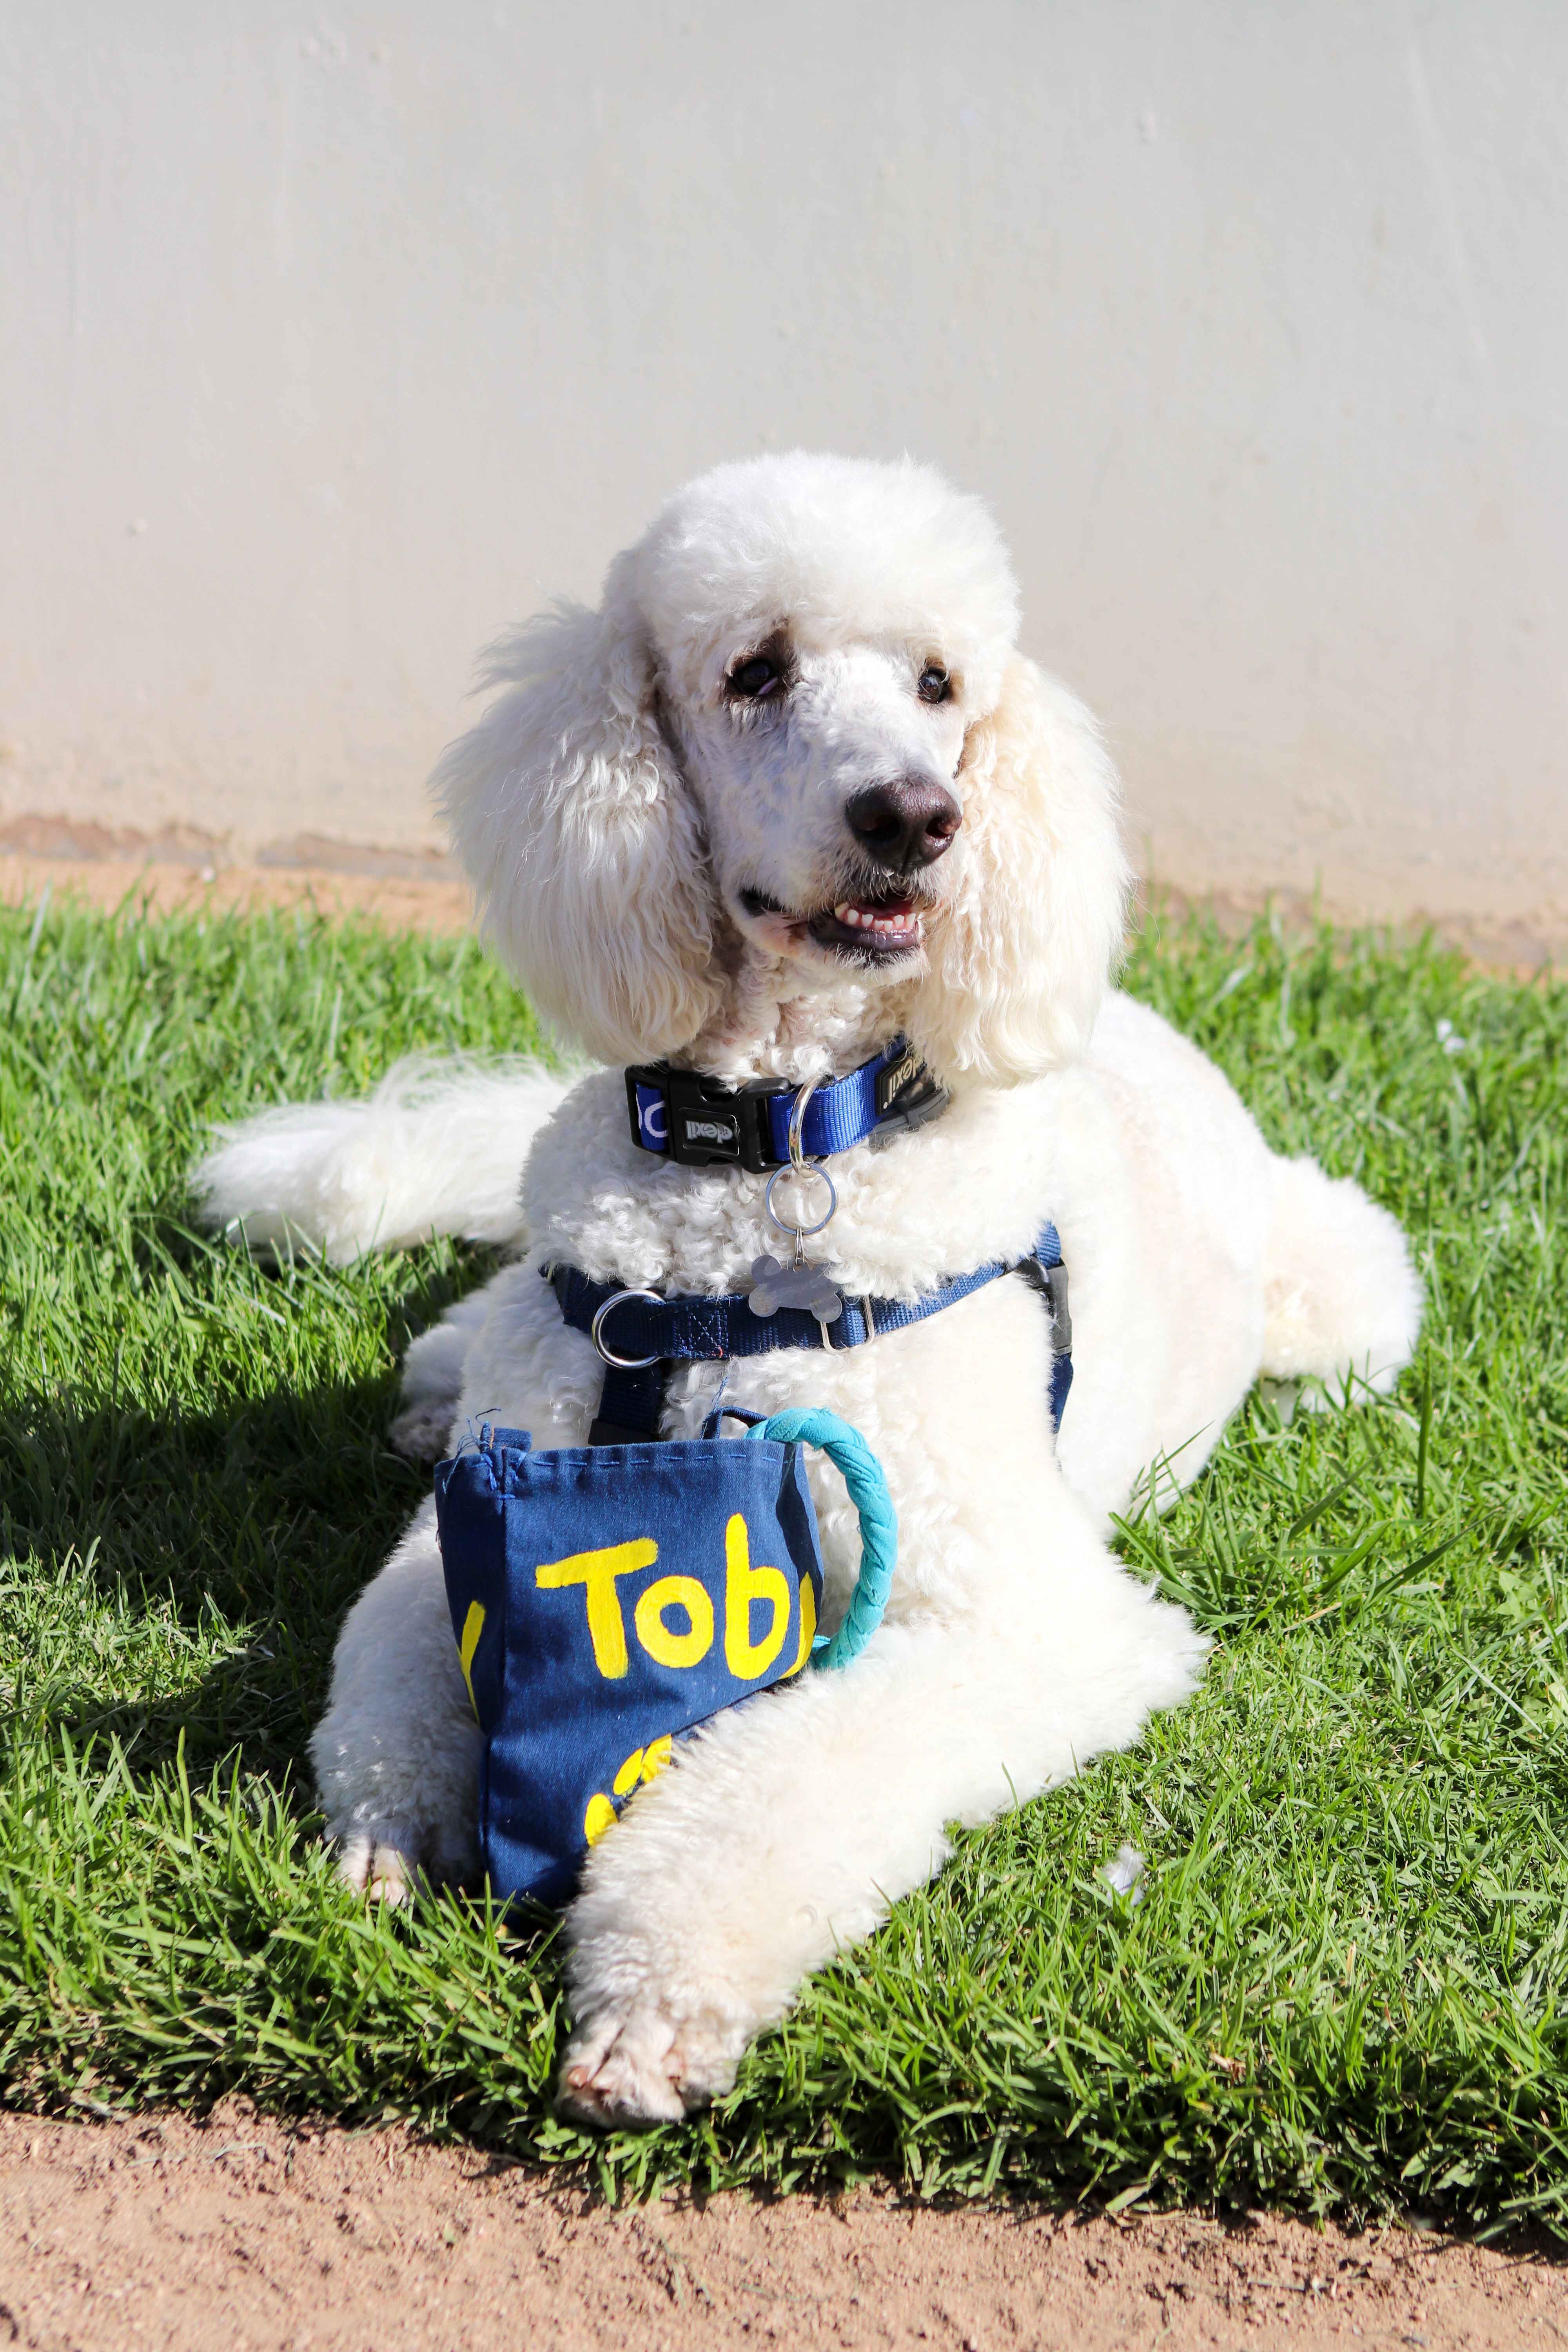 can a toy poodle be a service dog?